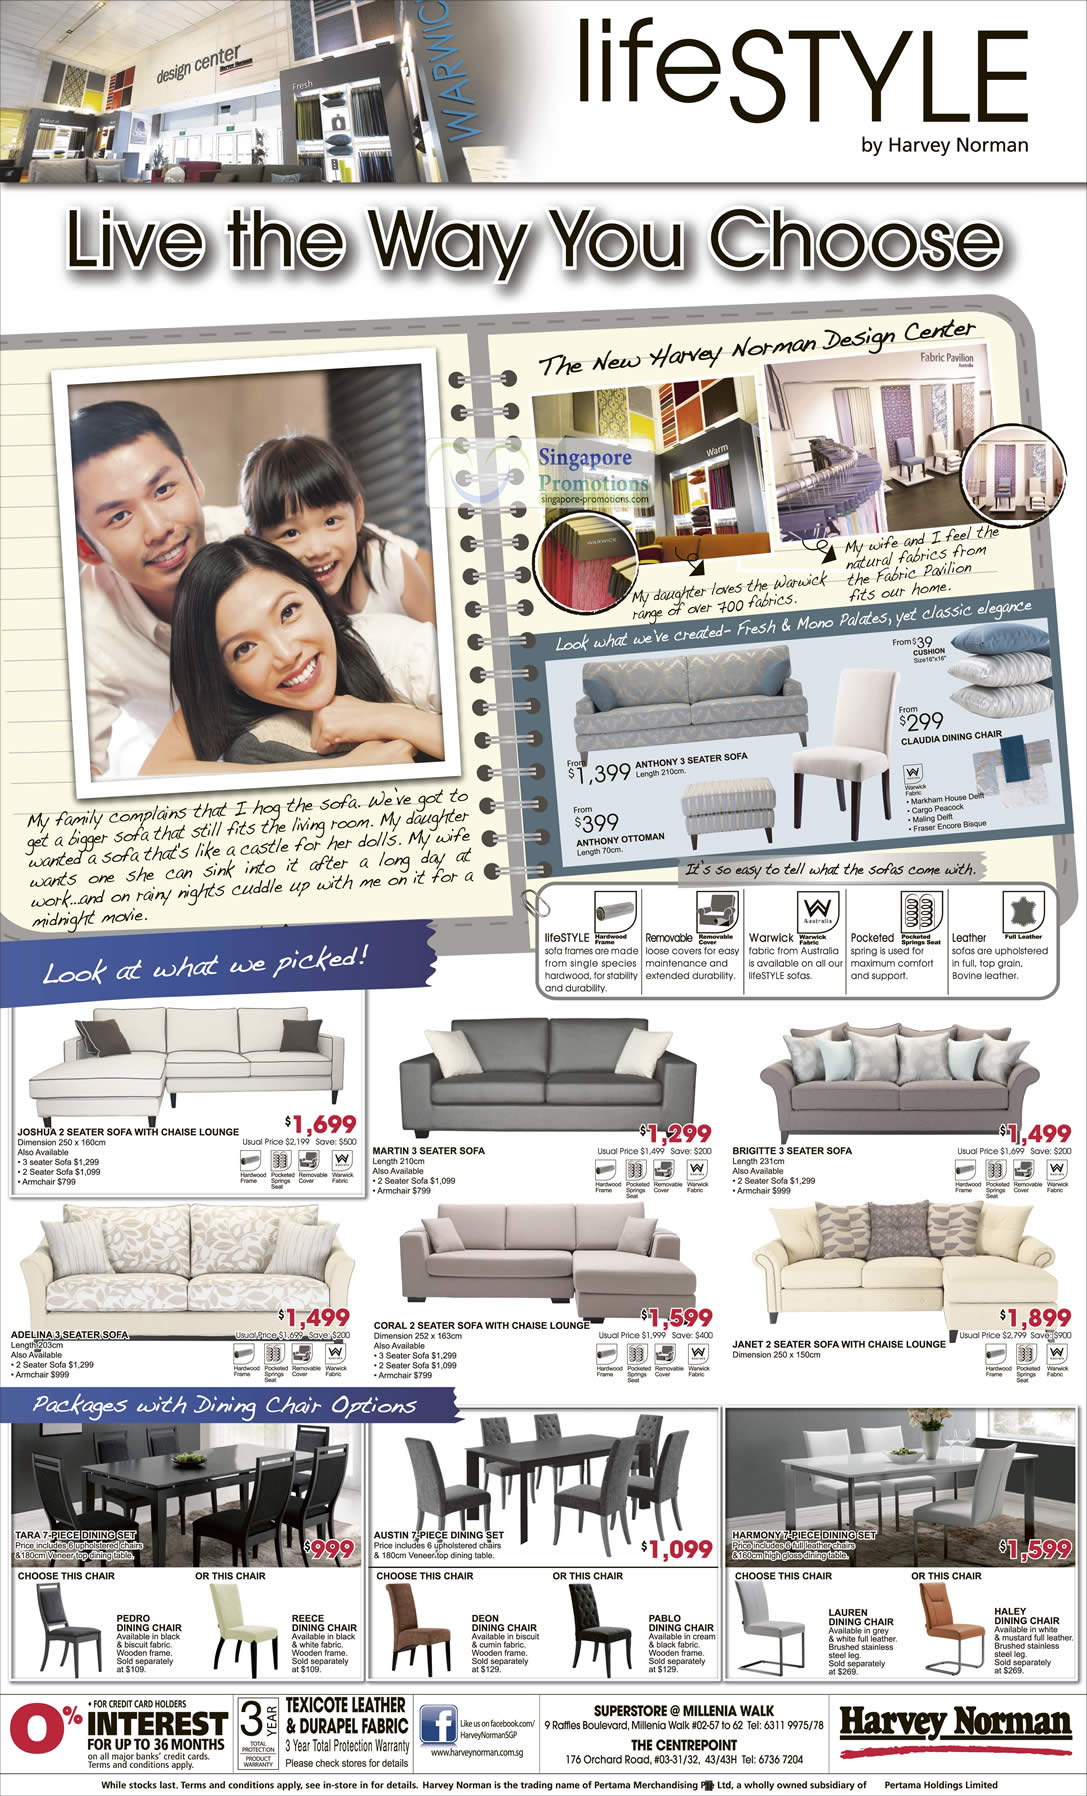 Featured image for Harvey Norman Digital Cameras, Furniture, Electronics & Appliances Offers 18 - 24 Aug 2012